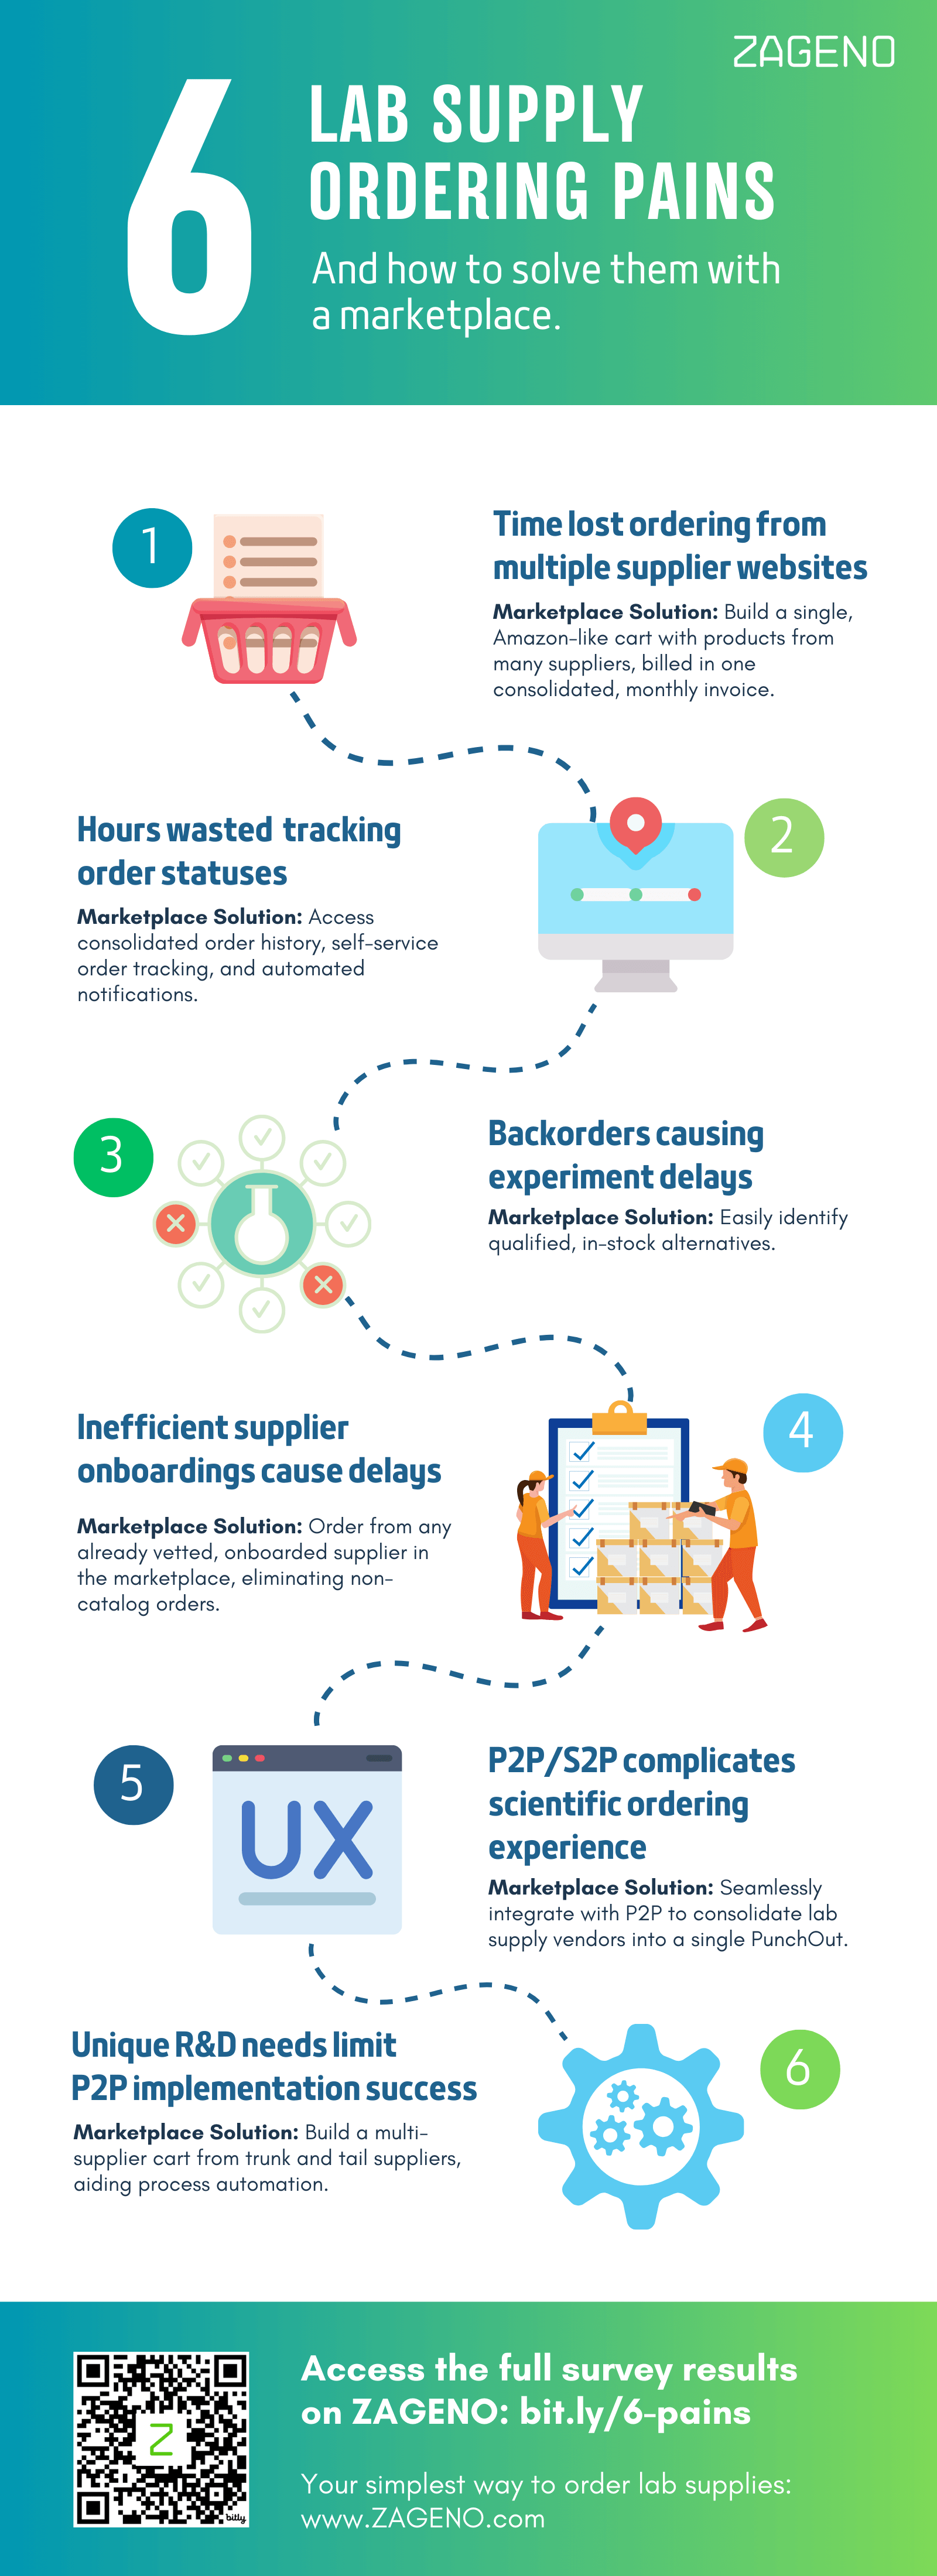 Infographic outlining 6 key lab supply ordering pain points